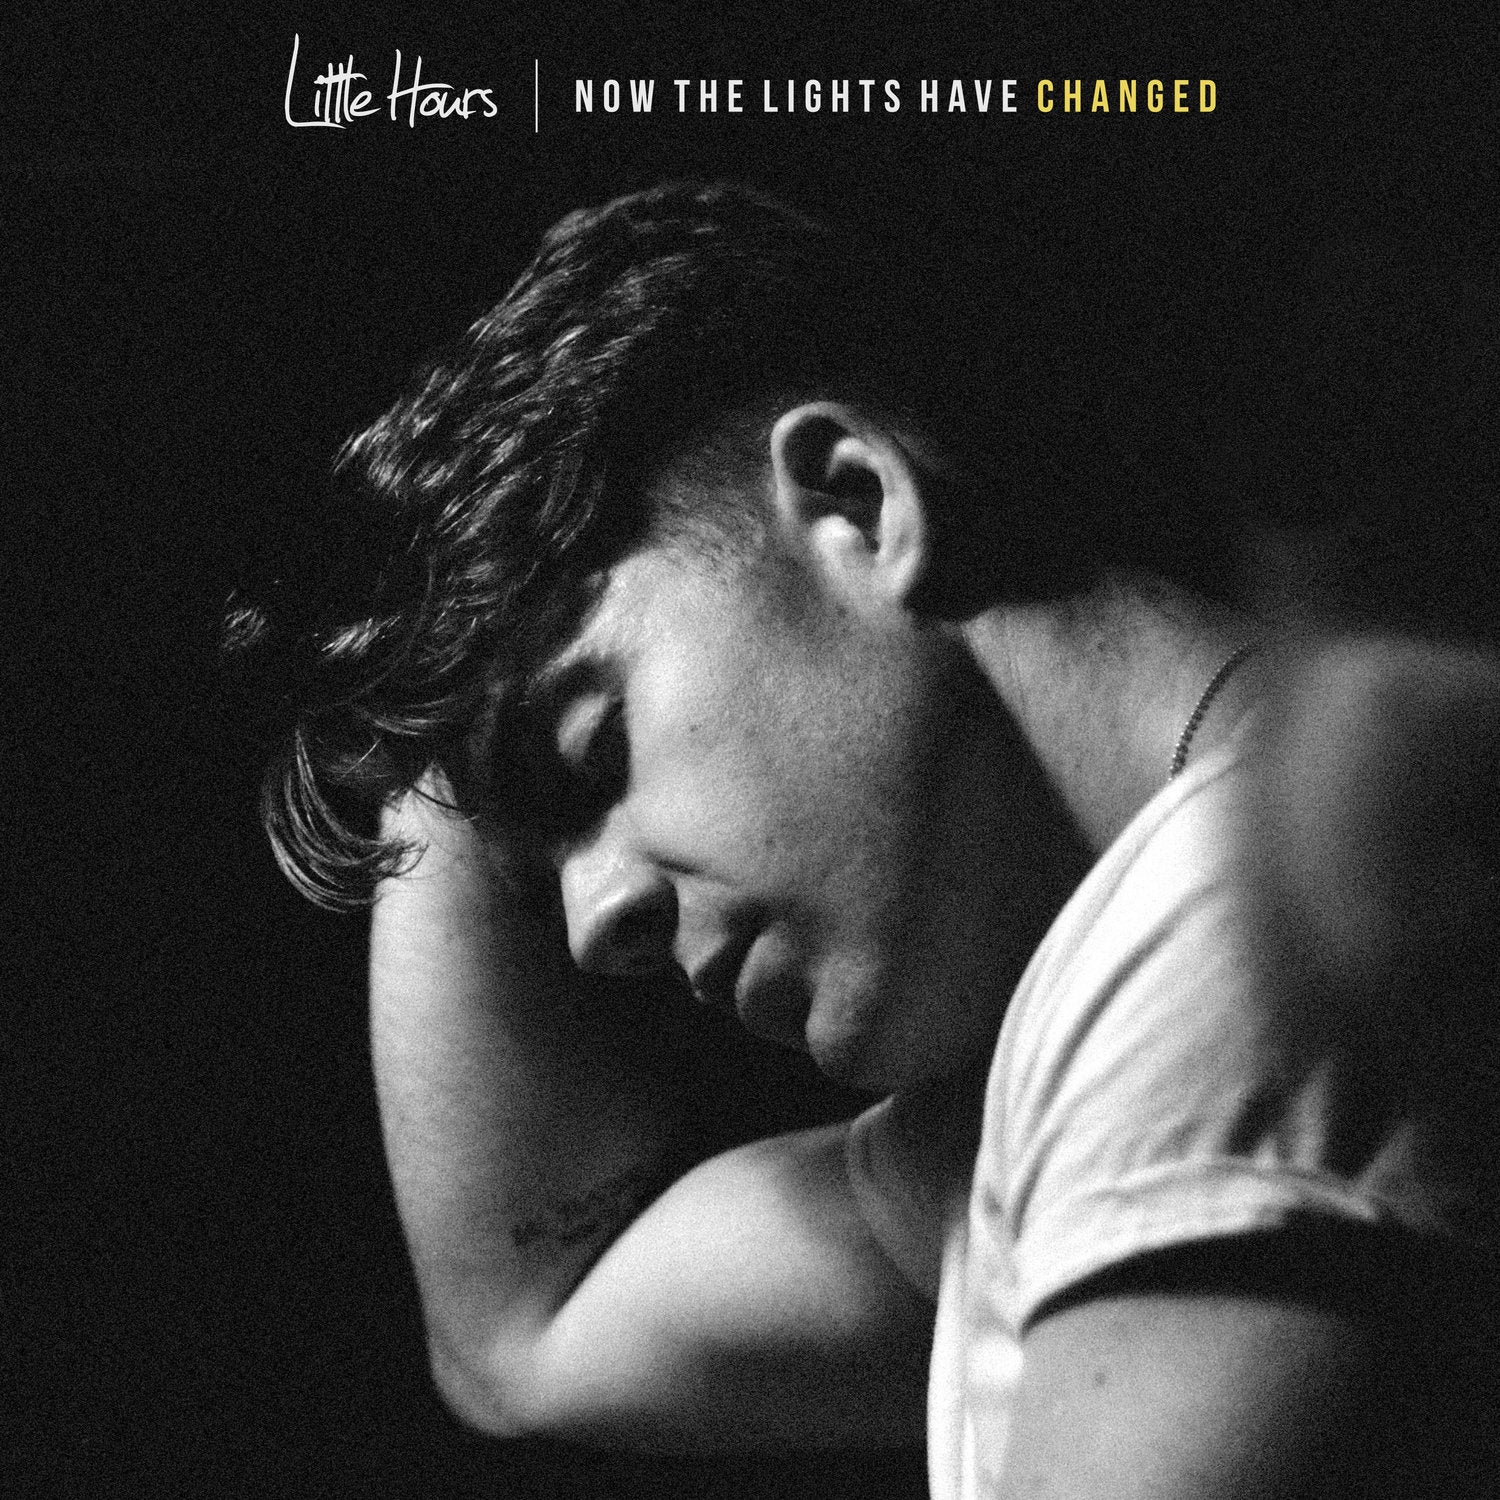 Little Hours: Now The Lights Have Changed (Vinyl LP)